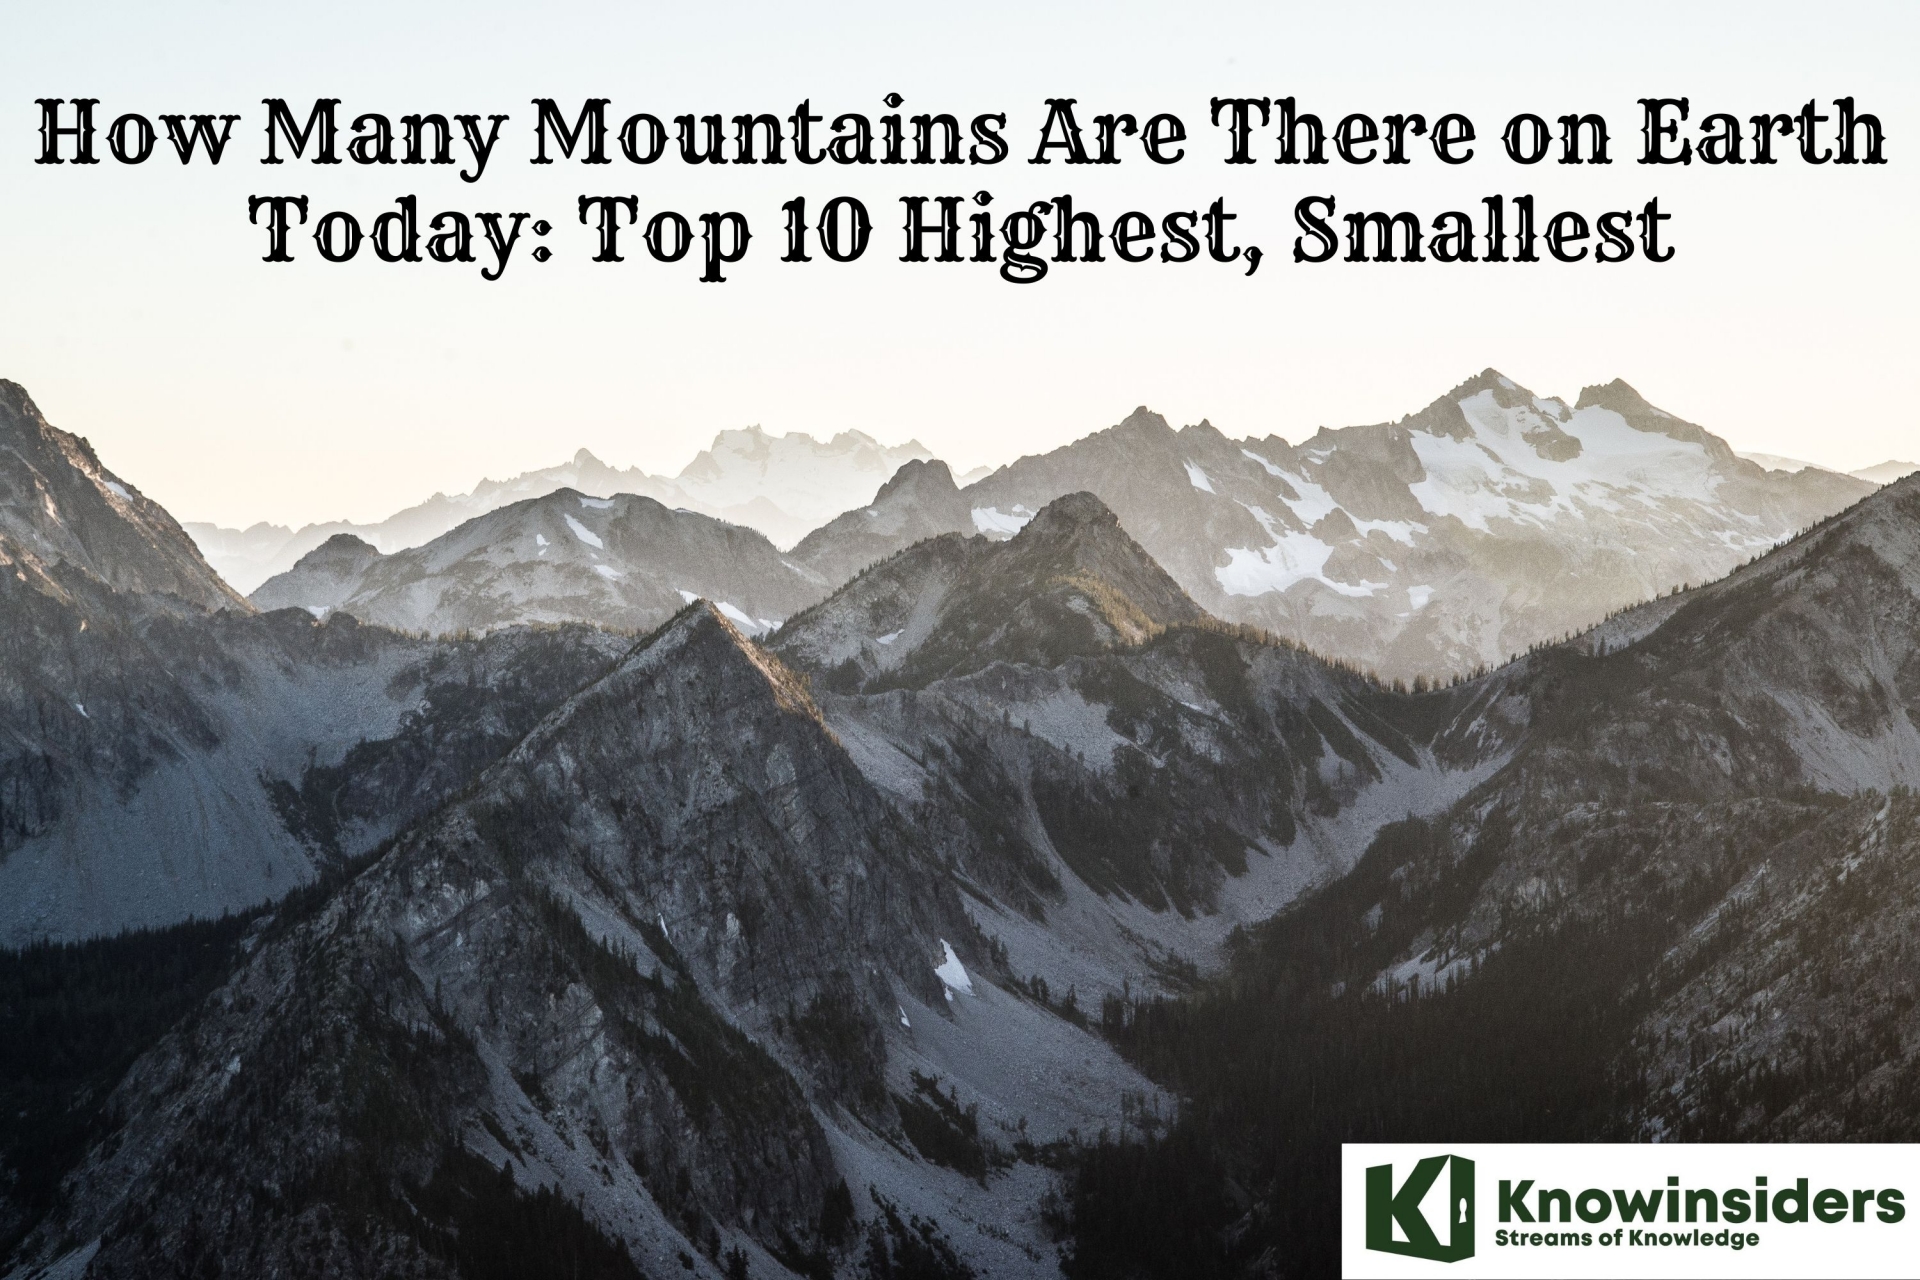 How Many Mountains Are There on Earth Today: Top 10 Highest, Smallest